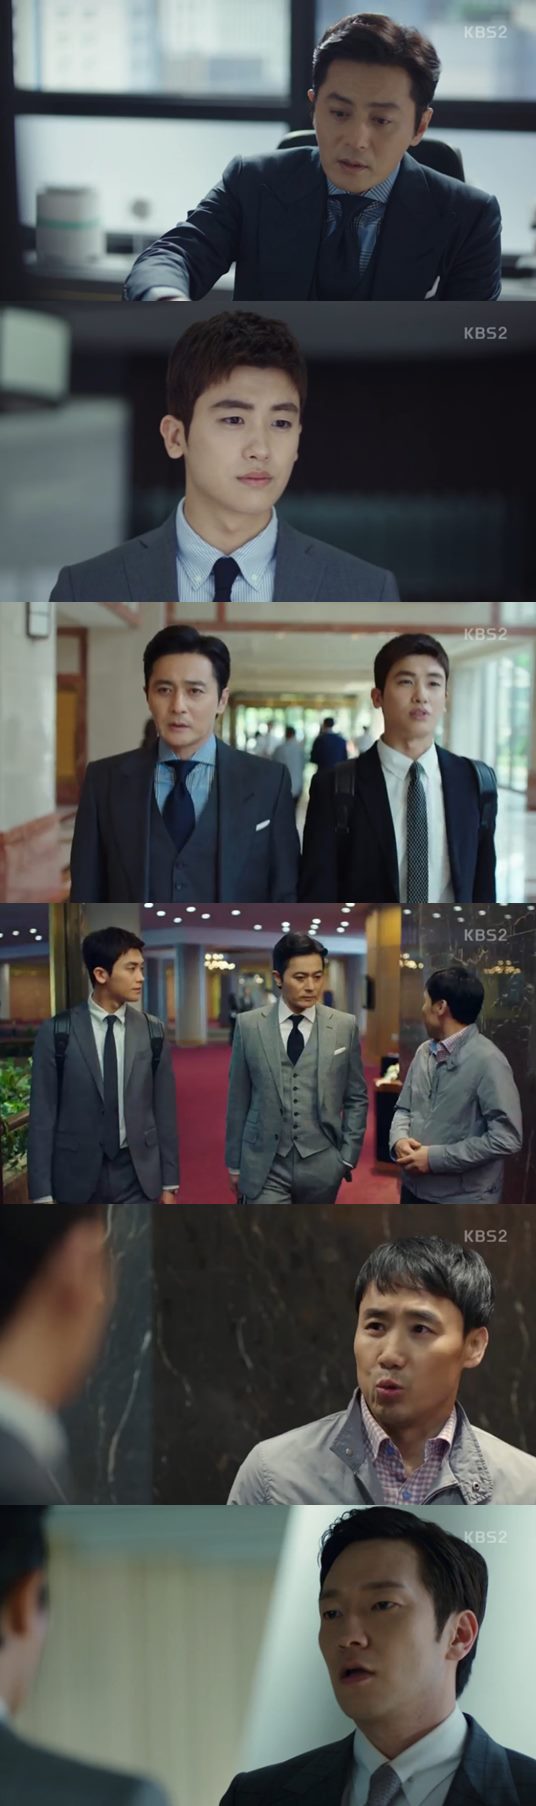 Jang Dong-gun and Park Hyung-sik of Suits showed A winner temperament.In the 5th KBS2 drama Suits (playplayed by Kim Jung-min and director Kim Jin-woo) broadcasted on the night of the 9th, Choi Kang Suk (Jang Dong-gun), a lawyer of Korean law firm legend, and Go Yeon Woo (Park Hyung-sik), Kang Ha-yeon (Jin Hee-kyung), Kang Suk secretary Hong Da-ham (Chae Jeong-an), and legal assistant affairs The legal story of the head Kim Ji-na (Go Sung-hee) and others was drawn.On this day, Kang Ha-yeon asked Ace lawyer Kang Suk to take the defense of his ex-husband who was caught in the lawsuit.Among them, people were dying about drugs, and Yeon Woo tried to defend the Victims by establishing a confrontation with the company.Kang Suk also showed off his walker-holic side, taking on two cases, including drug company issues, and David Kim, a former school student, appeared as an opponents lawyer.He was threatening Kang Suk, referring to Kang Suks past history.Kang Suk was stimulated by David Kim and instructed Yeon Woo to find out all about David Kim; A winner Kang Suks victorious spirit reached its peak.Kang Suk met with David Kim once again and the other side tried to work things out with a settlement.Yeon Woo continued to join Kang Suk, timed the situation of Victims, who died of cancer, but the company responded with shameless evidence.Kang Suk advised Yeon Woo that your intention is wrong, your intention is to be compassionate, and that you should not be swept away privately by the hearts and feelings of The Client.As such, Kang Suk and Yeon Woo continued to fight in their respective battlefields.Kang Suk tit-for-tat with Yeon Woo, but he took a close look at Yeon Woo and gave a strong stimulus to the growth of young Yeon Woo.Among them, Yeon Woo got a chance to prove his ability through a mock court at a law firm.Yeon Woo proposed a win-win to collude with Seo.Kim Ji-na also said that he would give the lawyers mock court The Client as if he had a favorable feeling for Yeon Woo.At the end of the show, Seo hit the back of the head as if betraying Yeon Woo, and Yeon Woo was in danger of blowing the opportunity in a difficult law firm.